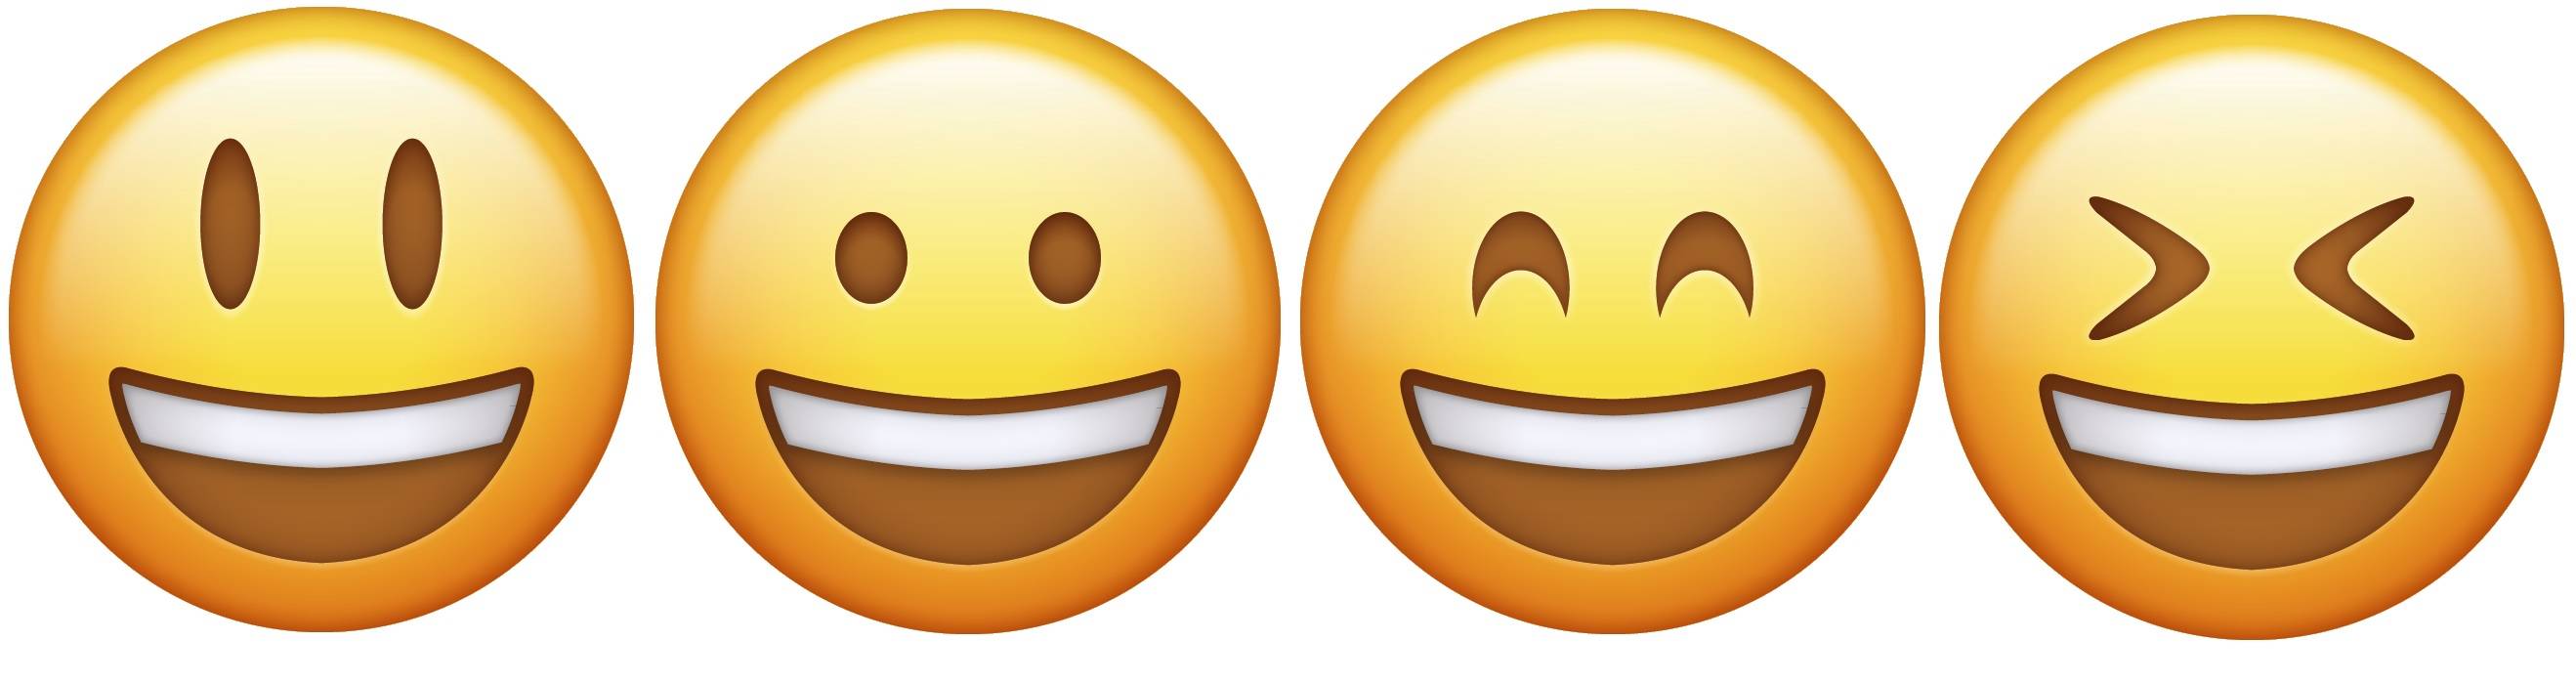 What Does This Emoji Mean Emoji Face Meanings Explained